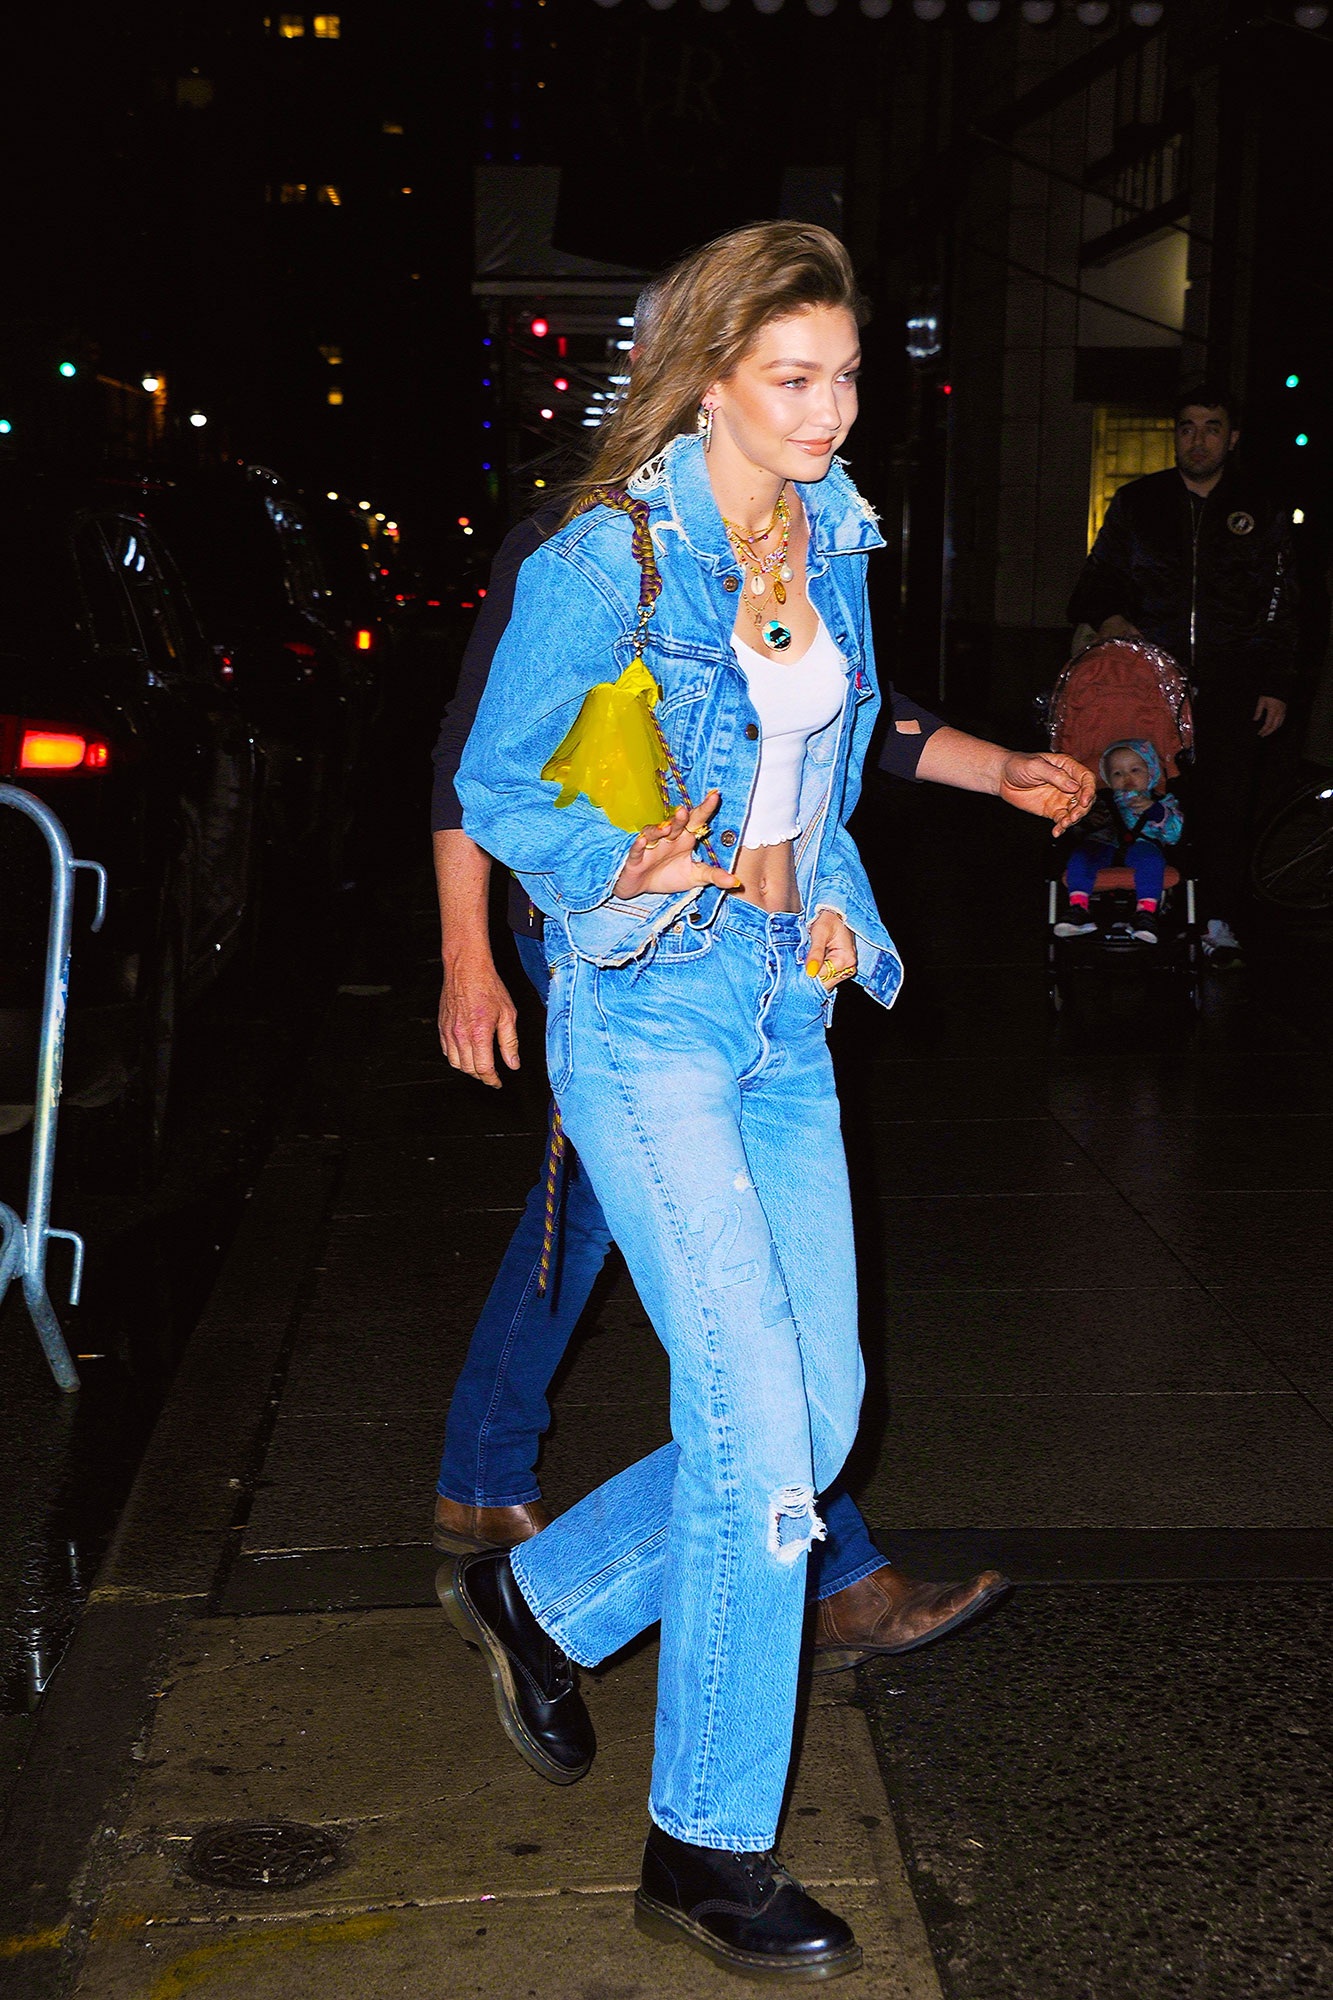 Gigi Hadid rocked a WhiteBlond Hair Color and a Yellow Jaya Jumpsuit from  Isabel Marant in NYC  The Nines